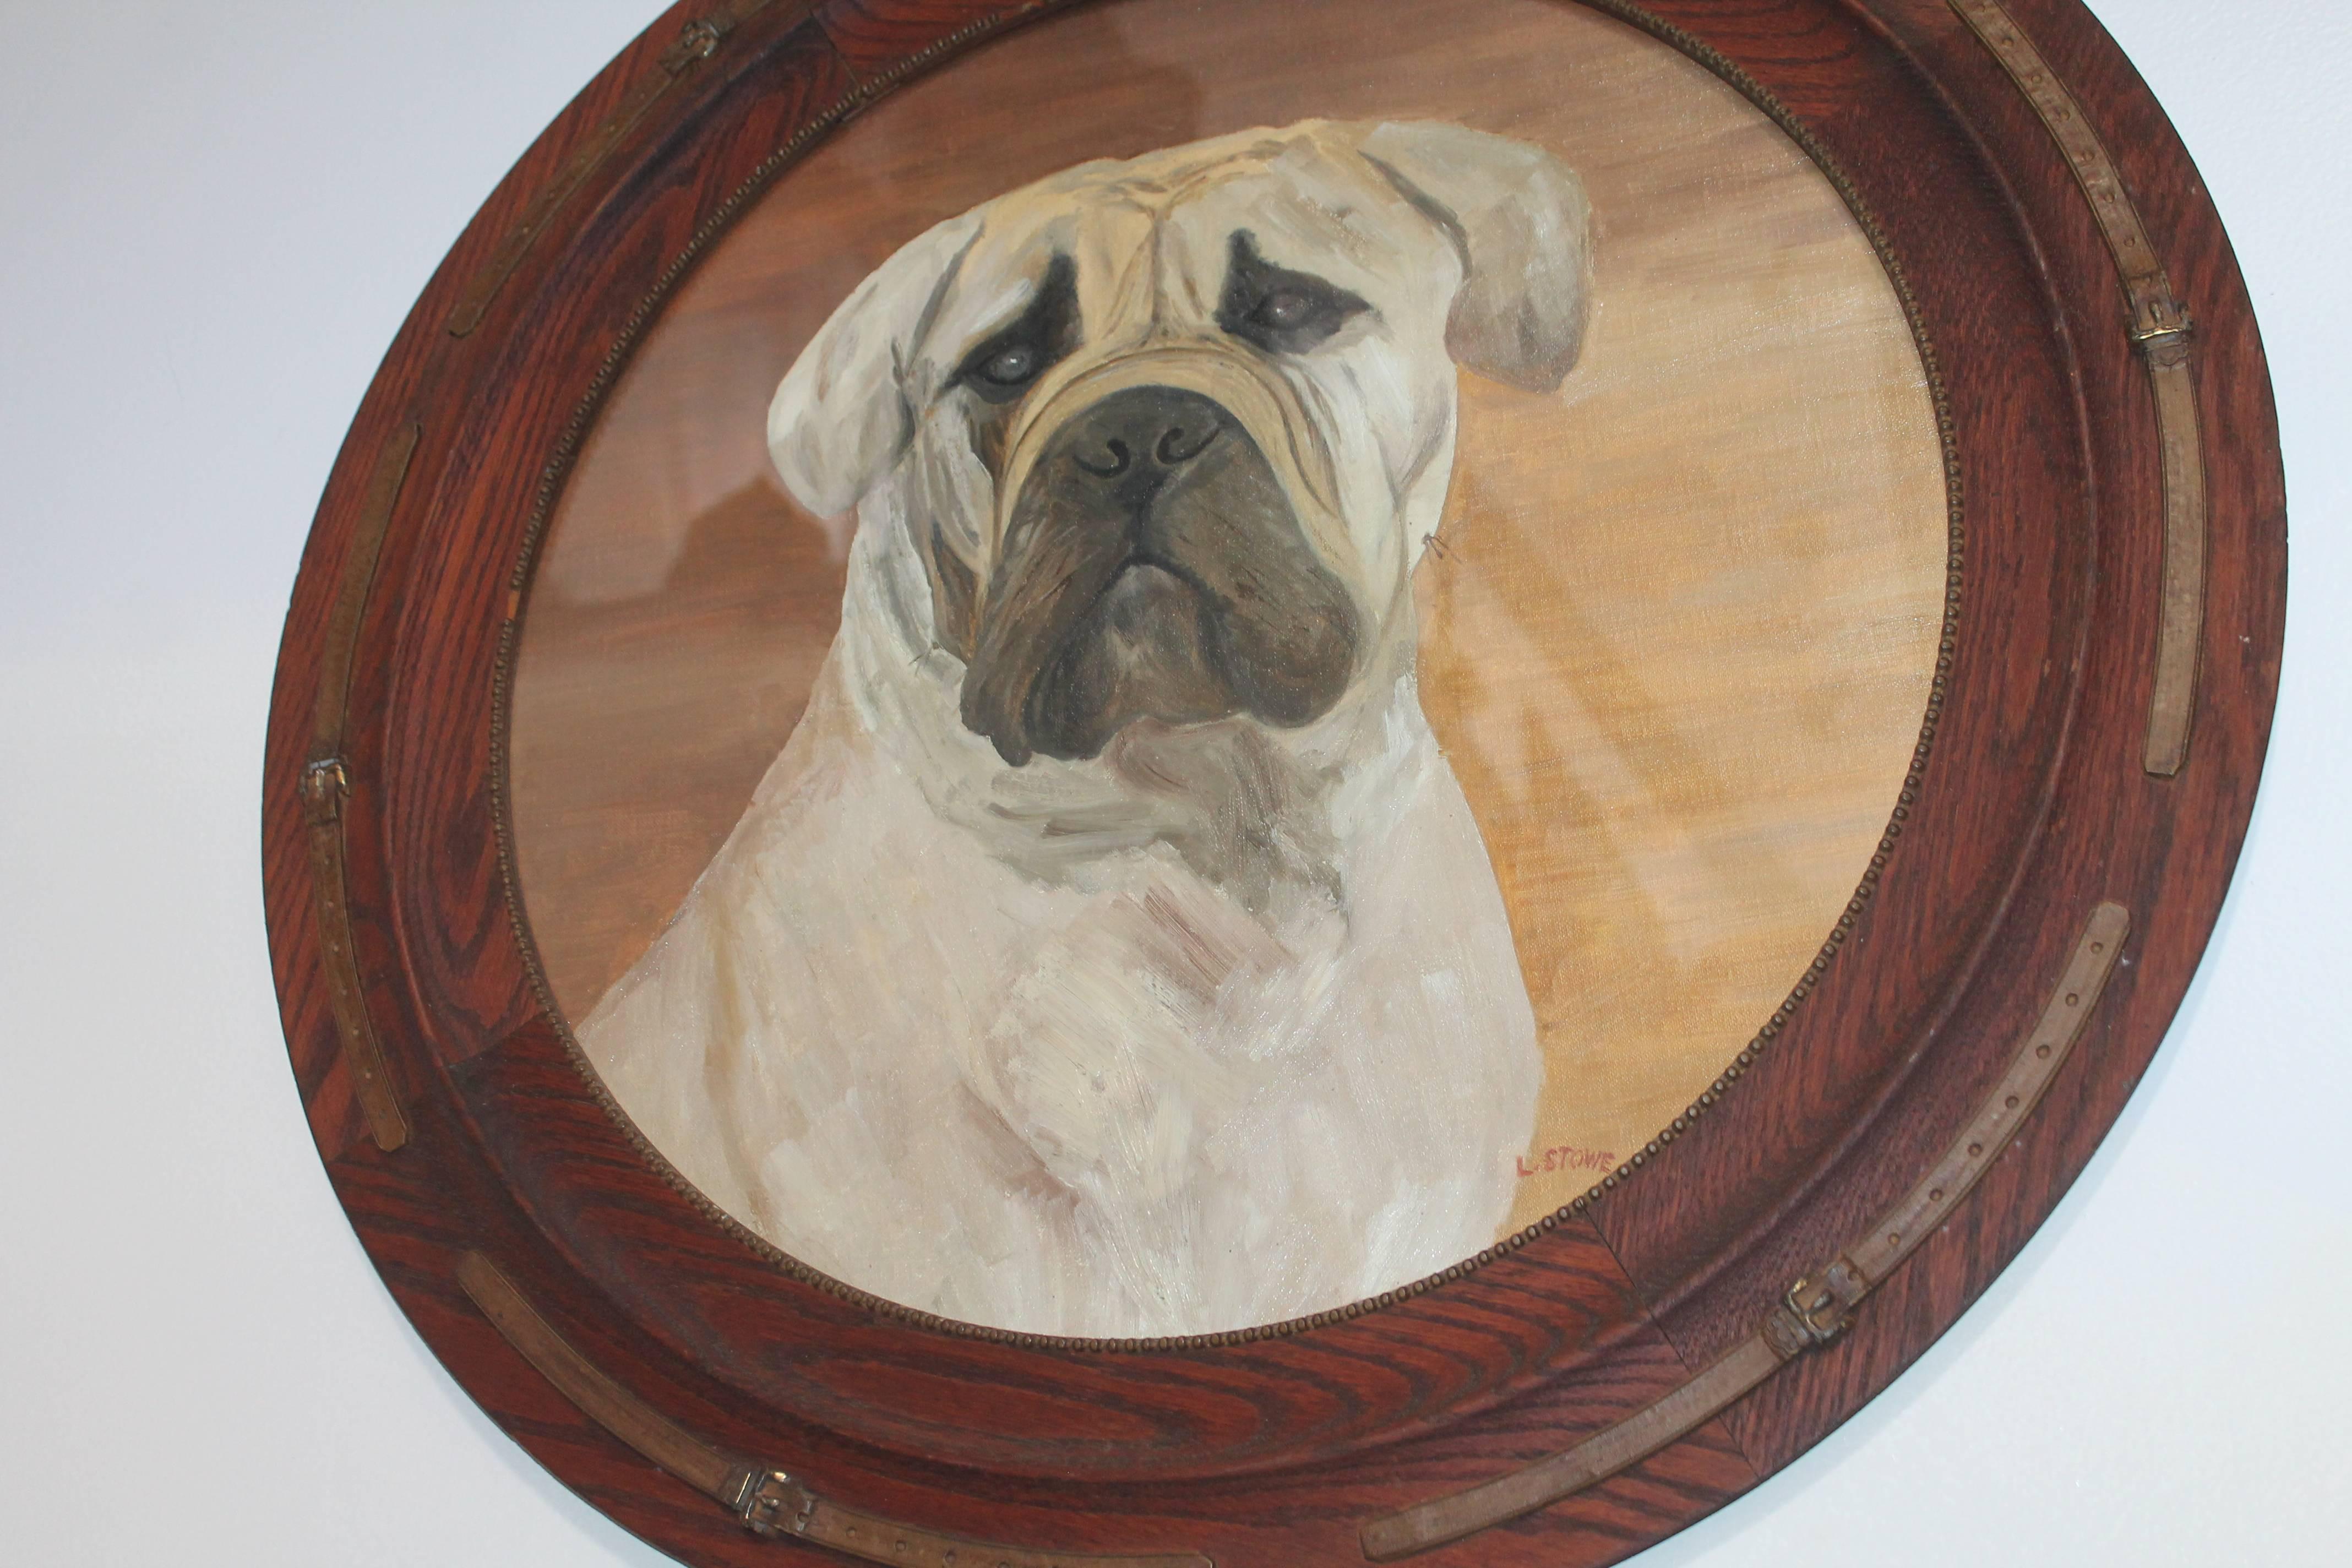 This large oil painting on canvas behind glass is in the original frame. The frame has carved collars in gilded paint all around applique on the oak frame. This most unusual oil painting we believe to be a mastiff dog.